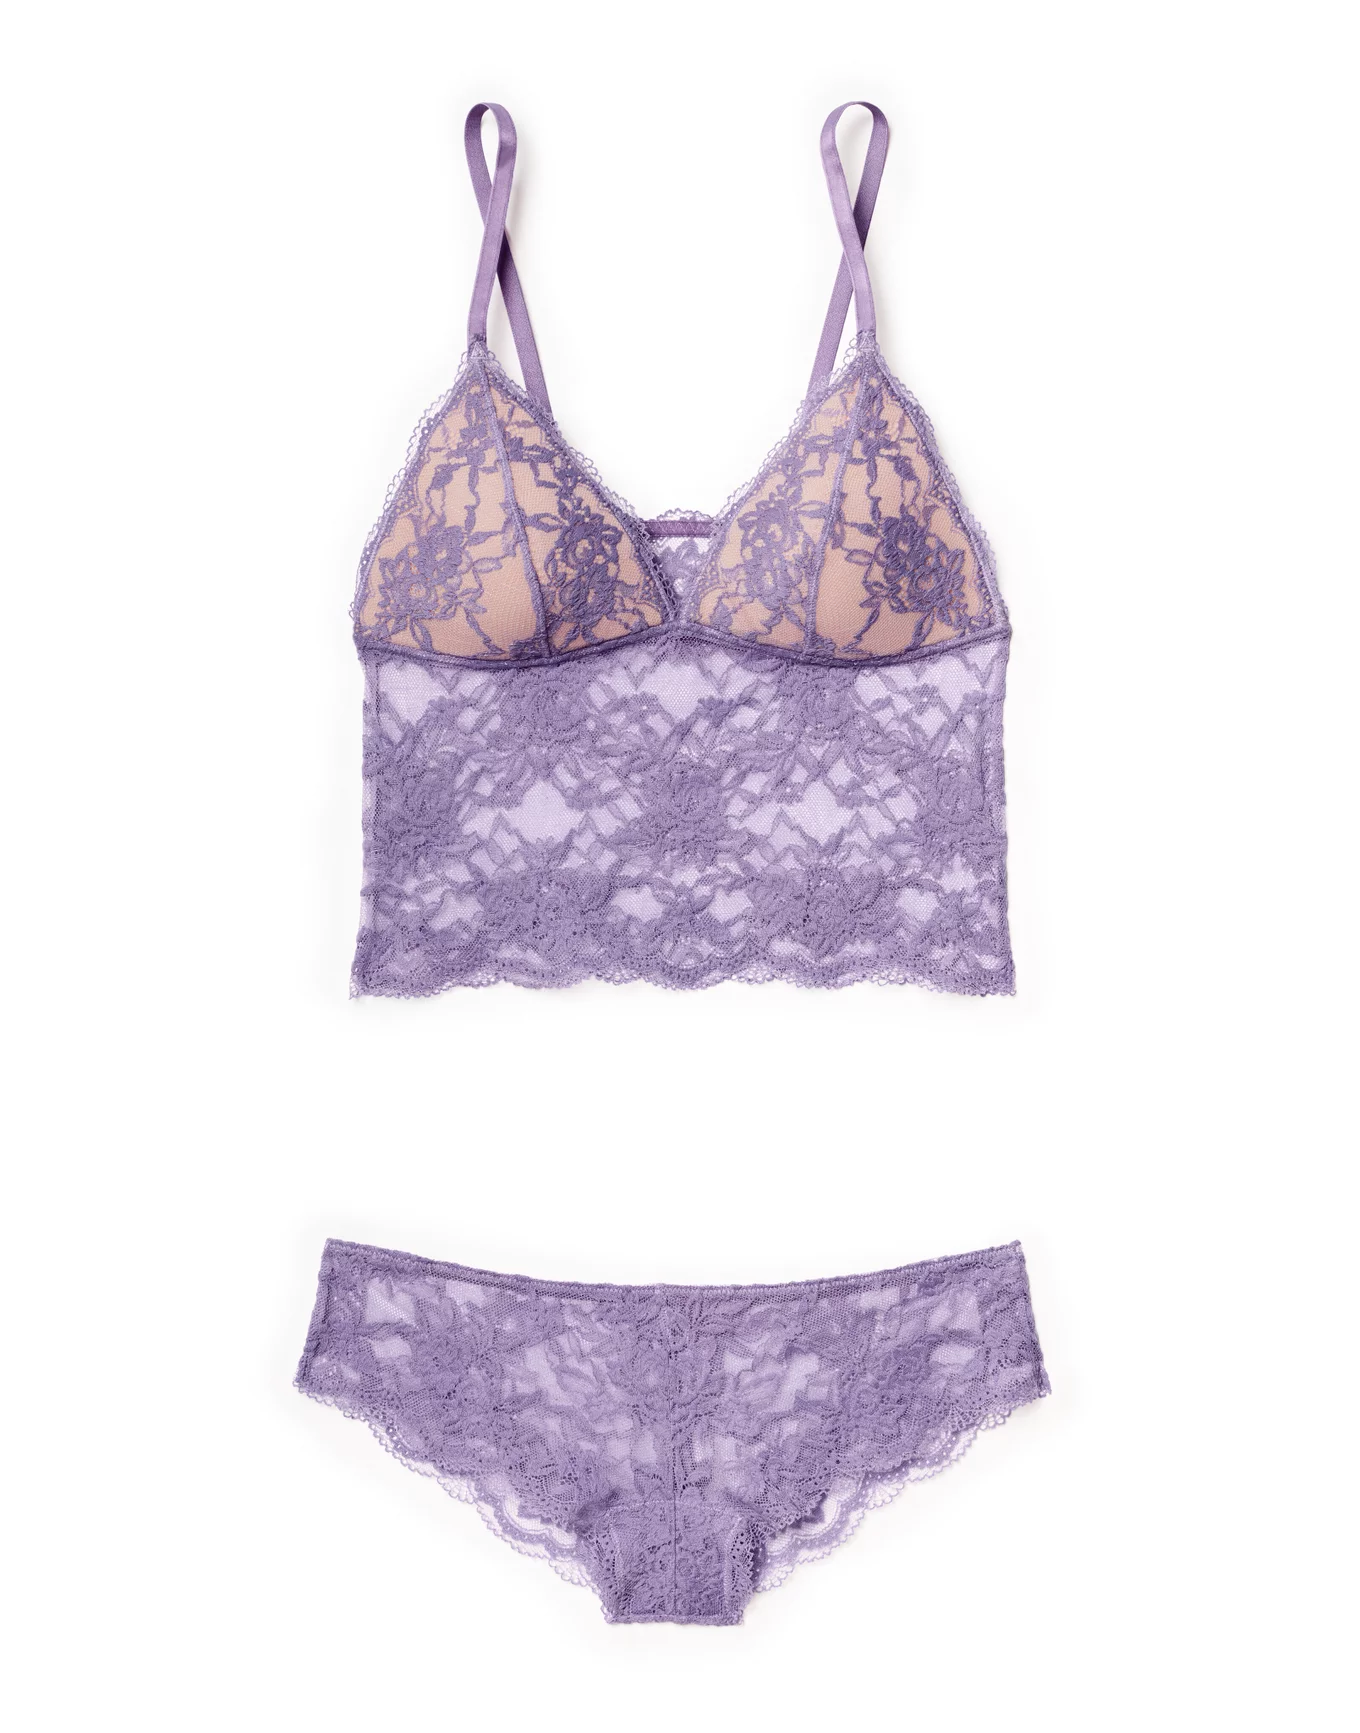 Second Life Marketplace - Sweet Nothings Lingerie - Purple